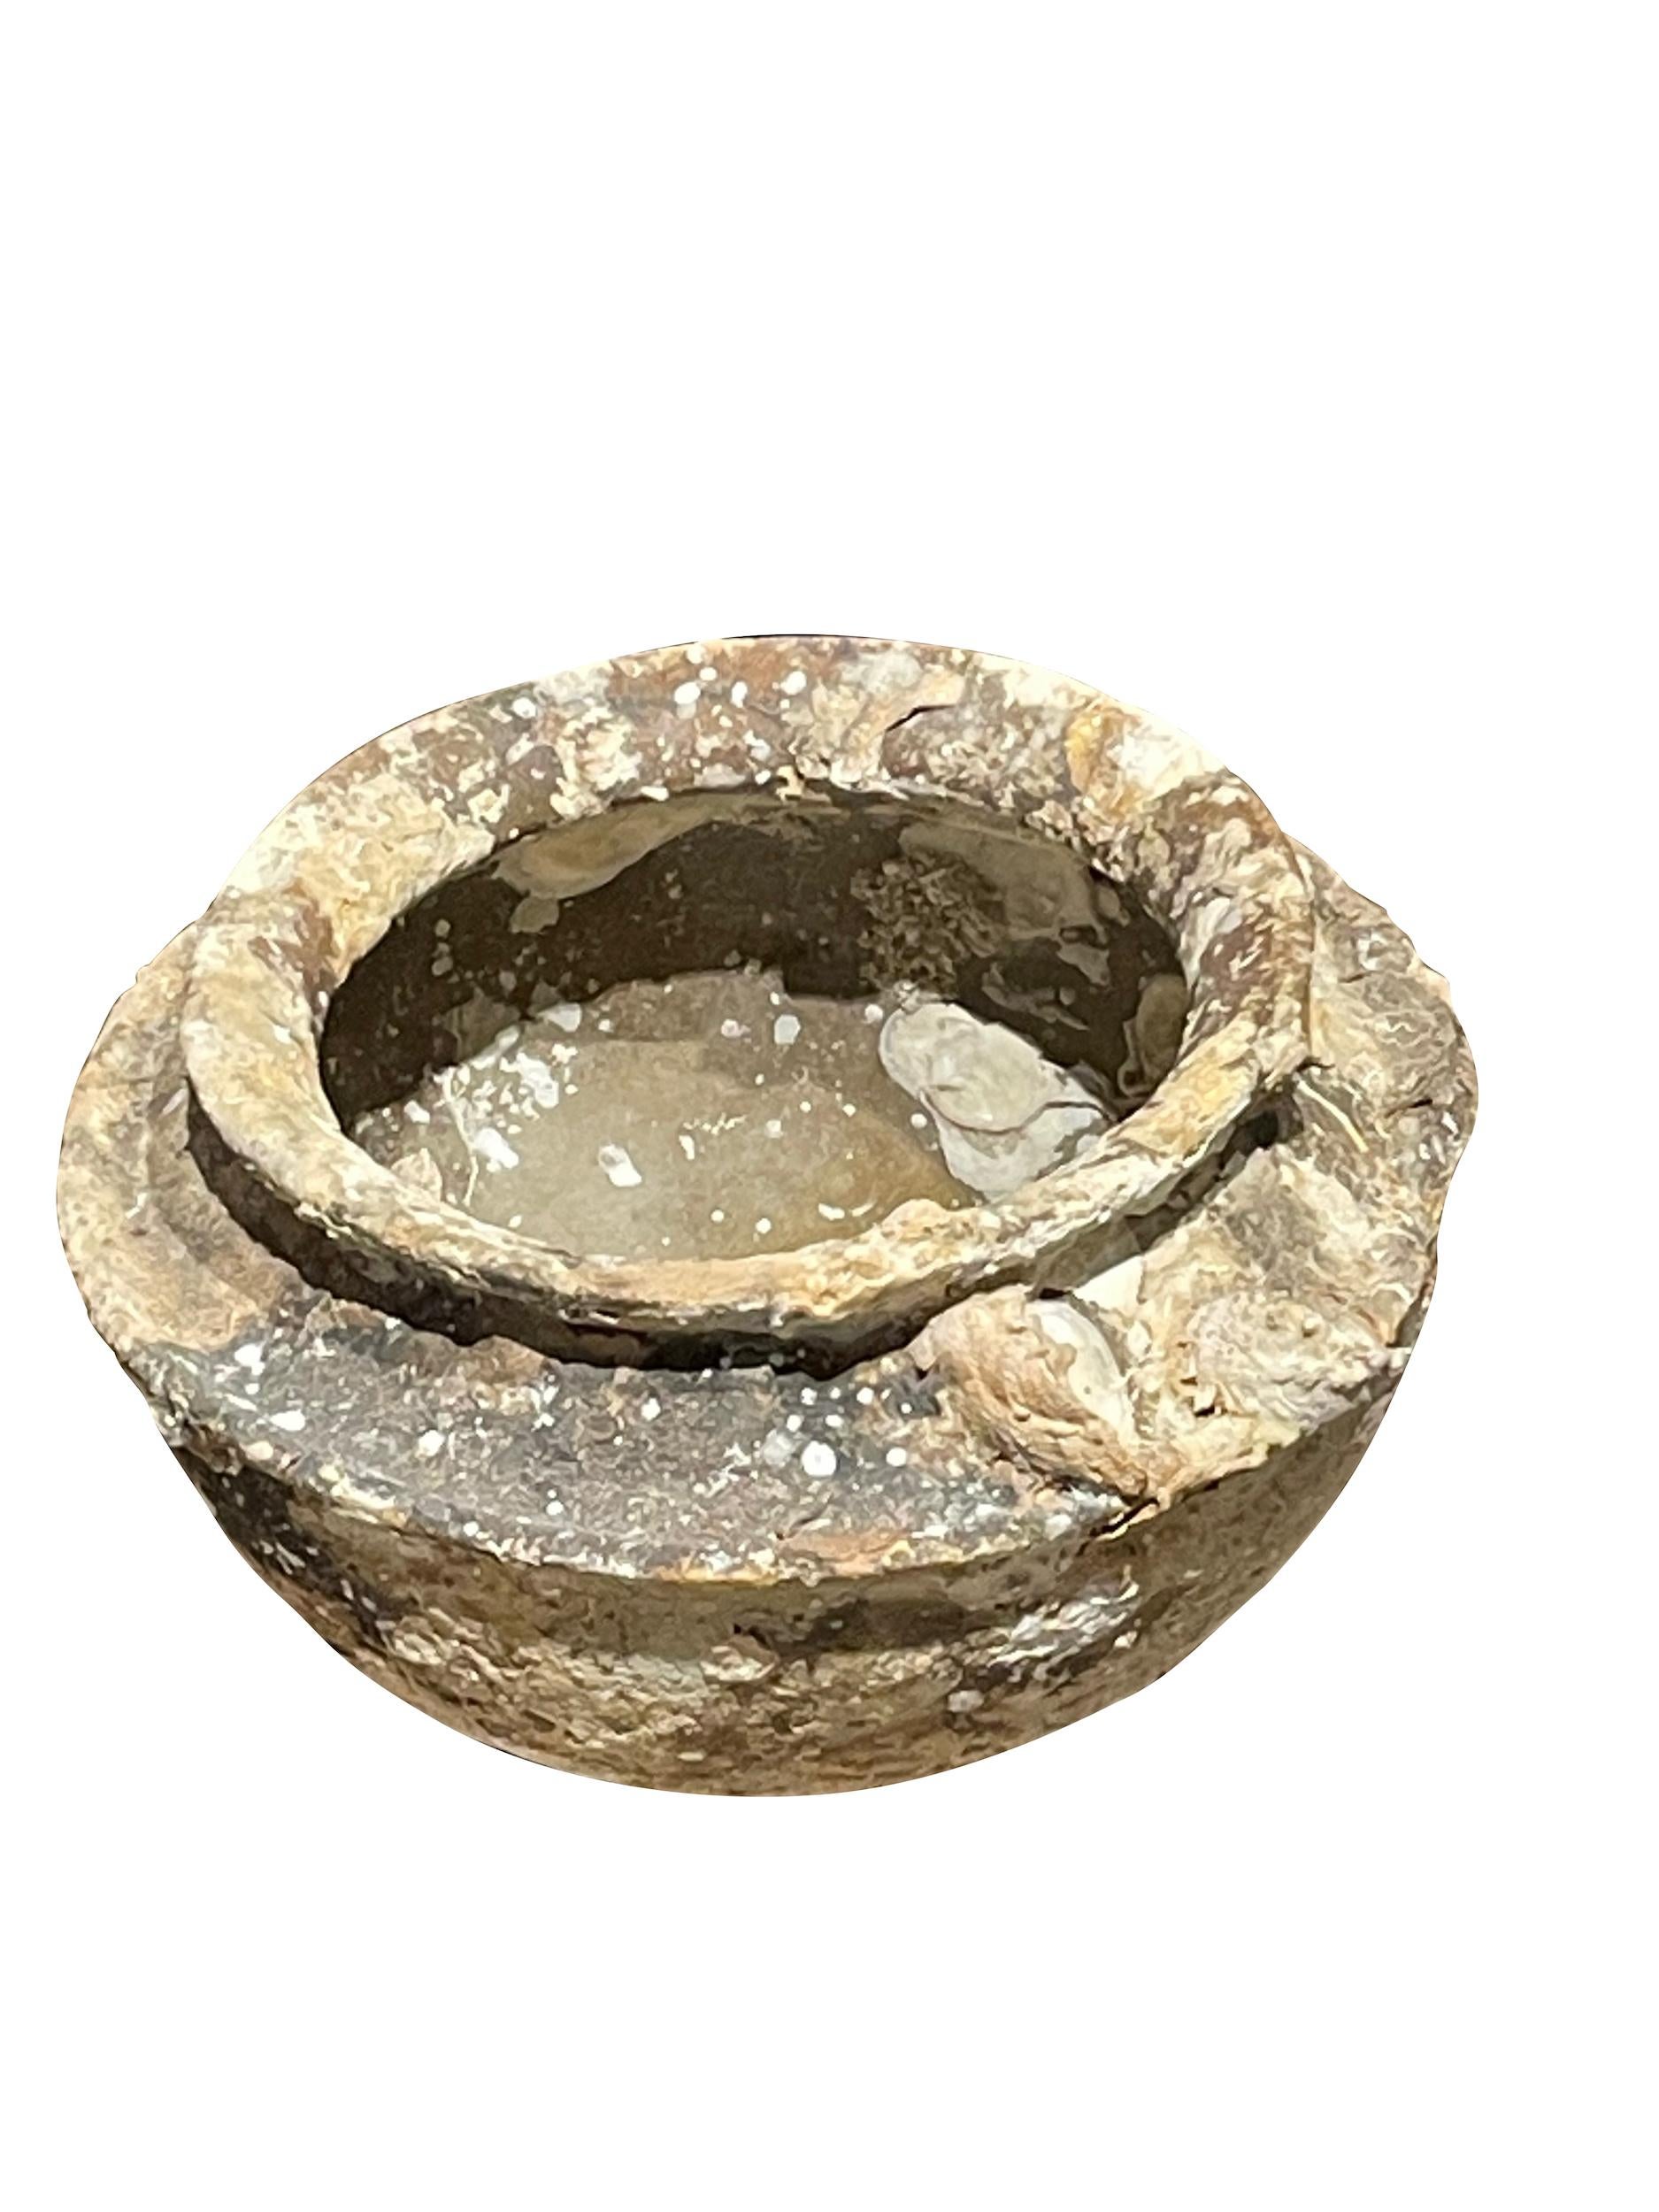 16th century Cambodian vessel found from shipwreck of the coast of Cambodia.
Beautiful natural shells and barnacles from being under water
for hundreds of years.
Museum quality.
